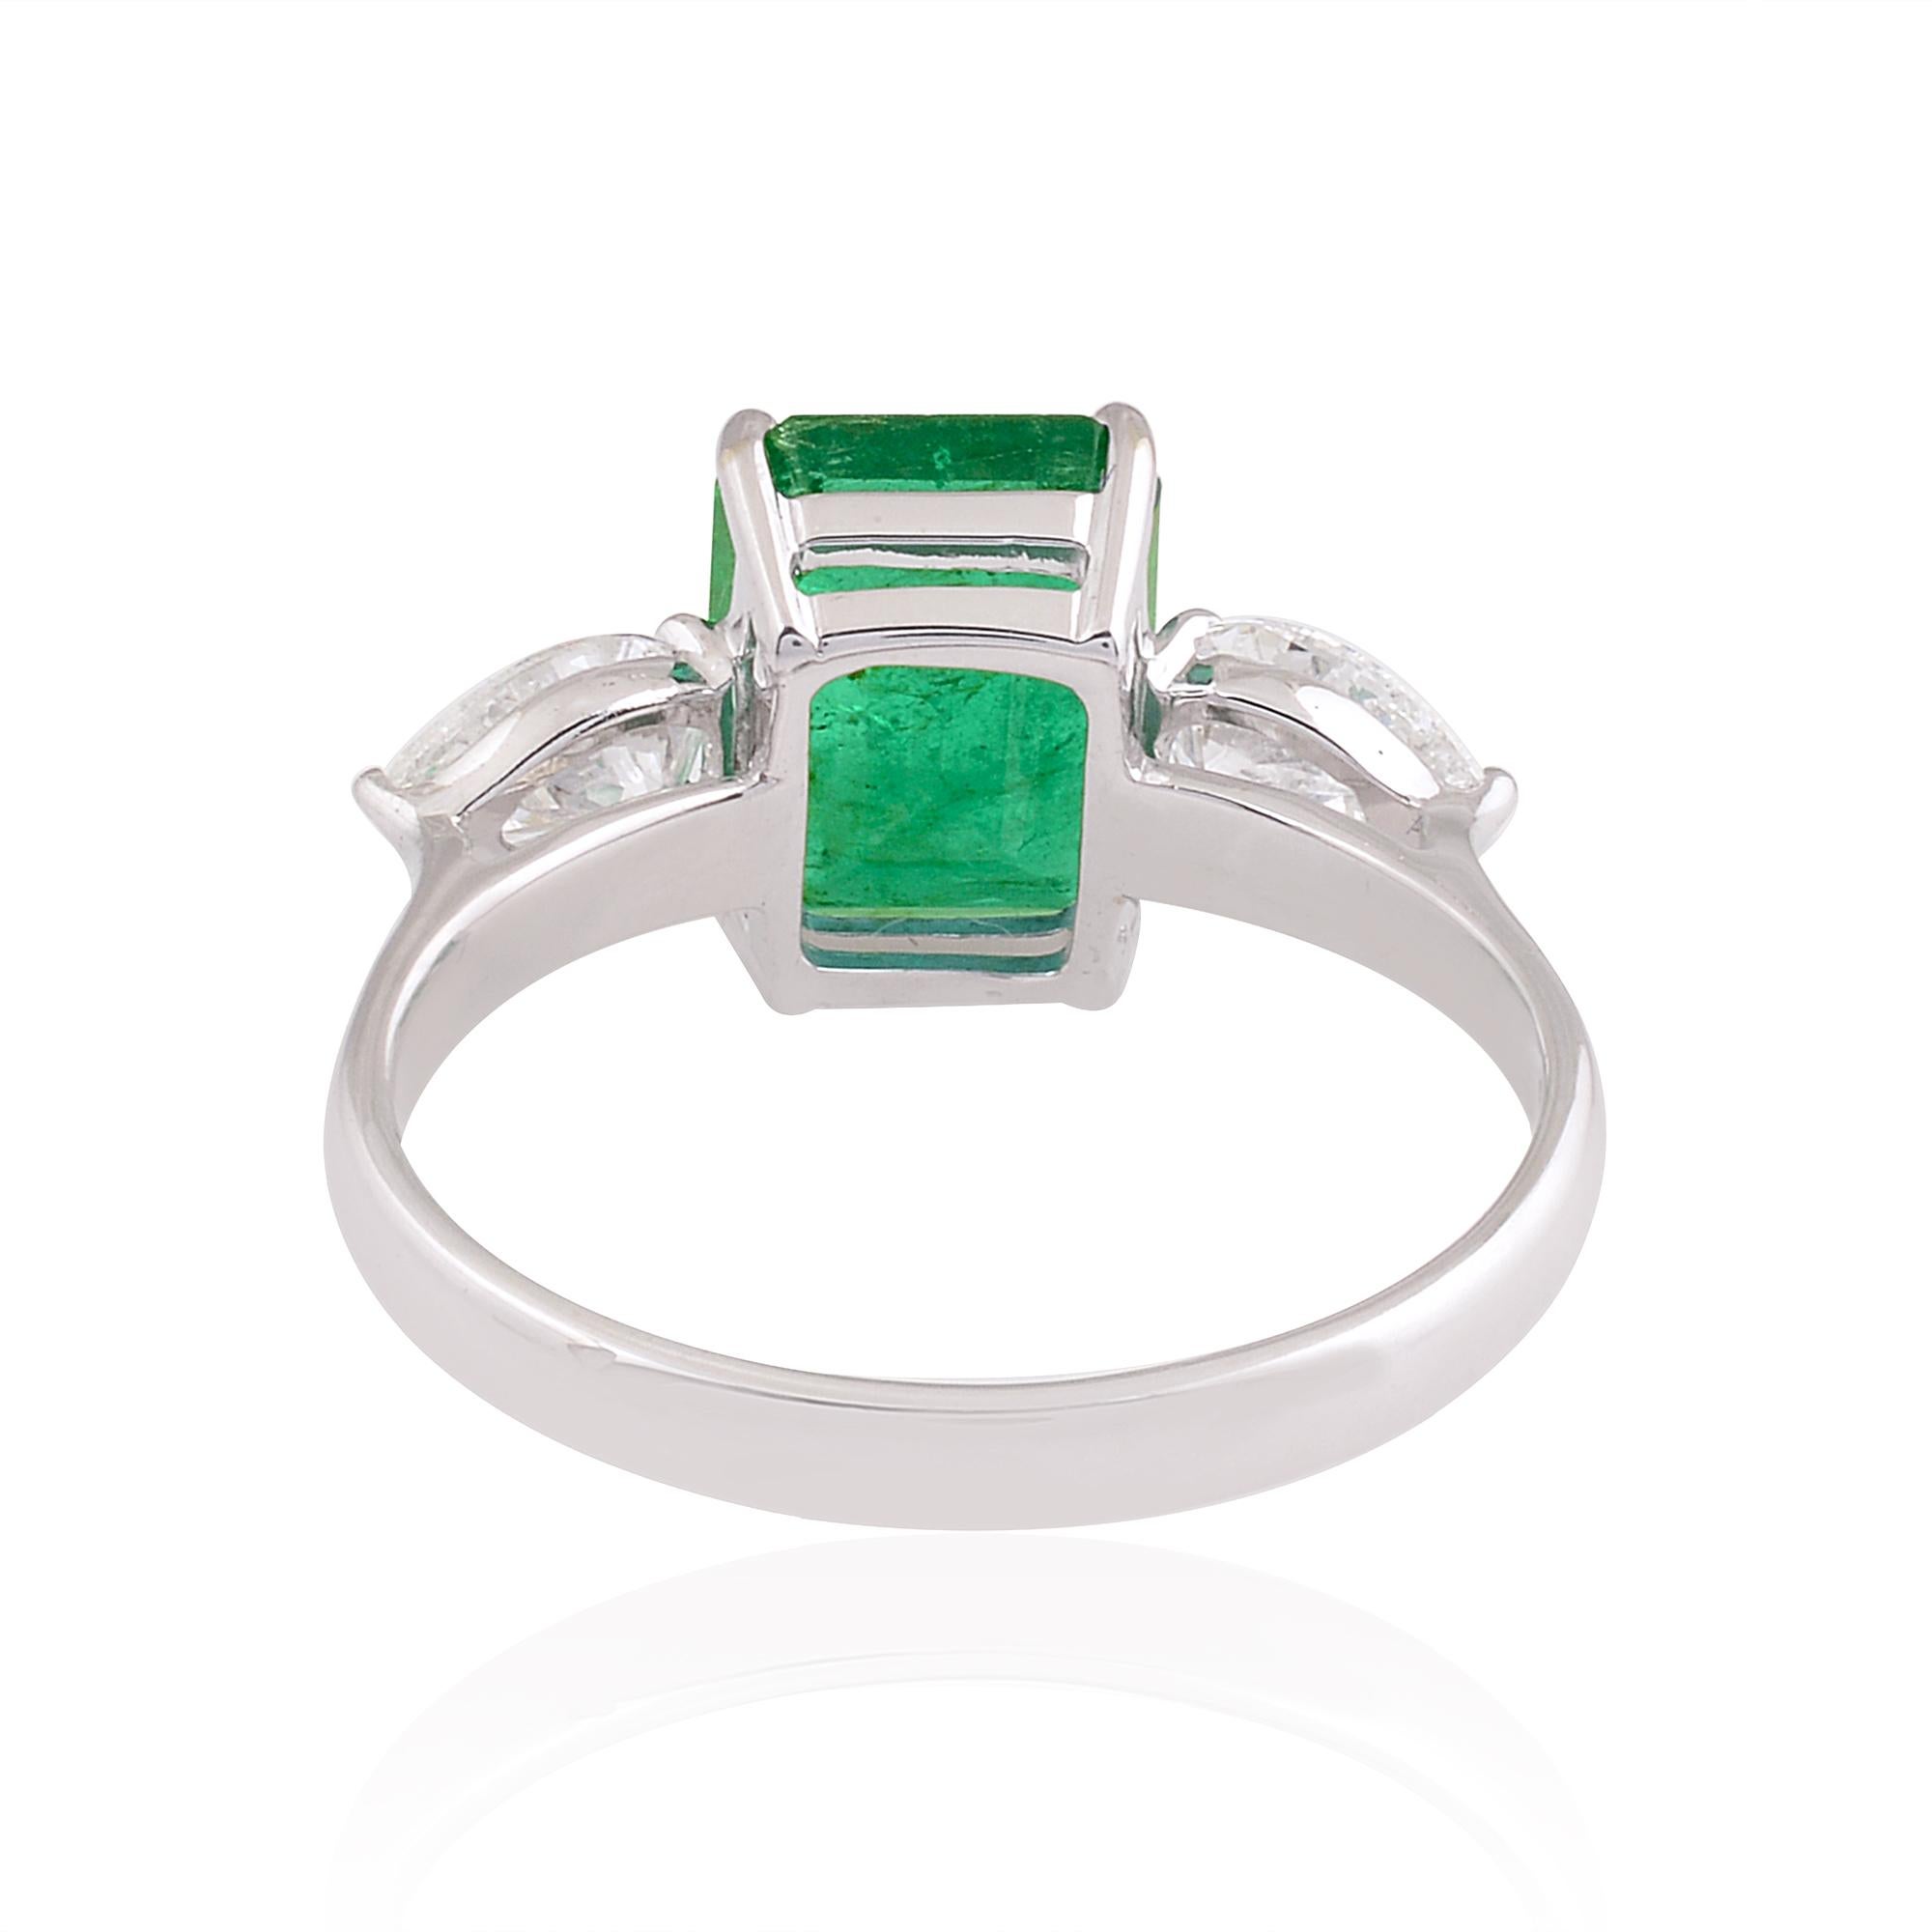 For Sale:  Natural Emerald Gemstone Cocktail Ring Pear Diamond 18 Karat White Gold Jewelry 3